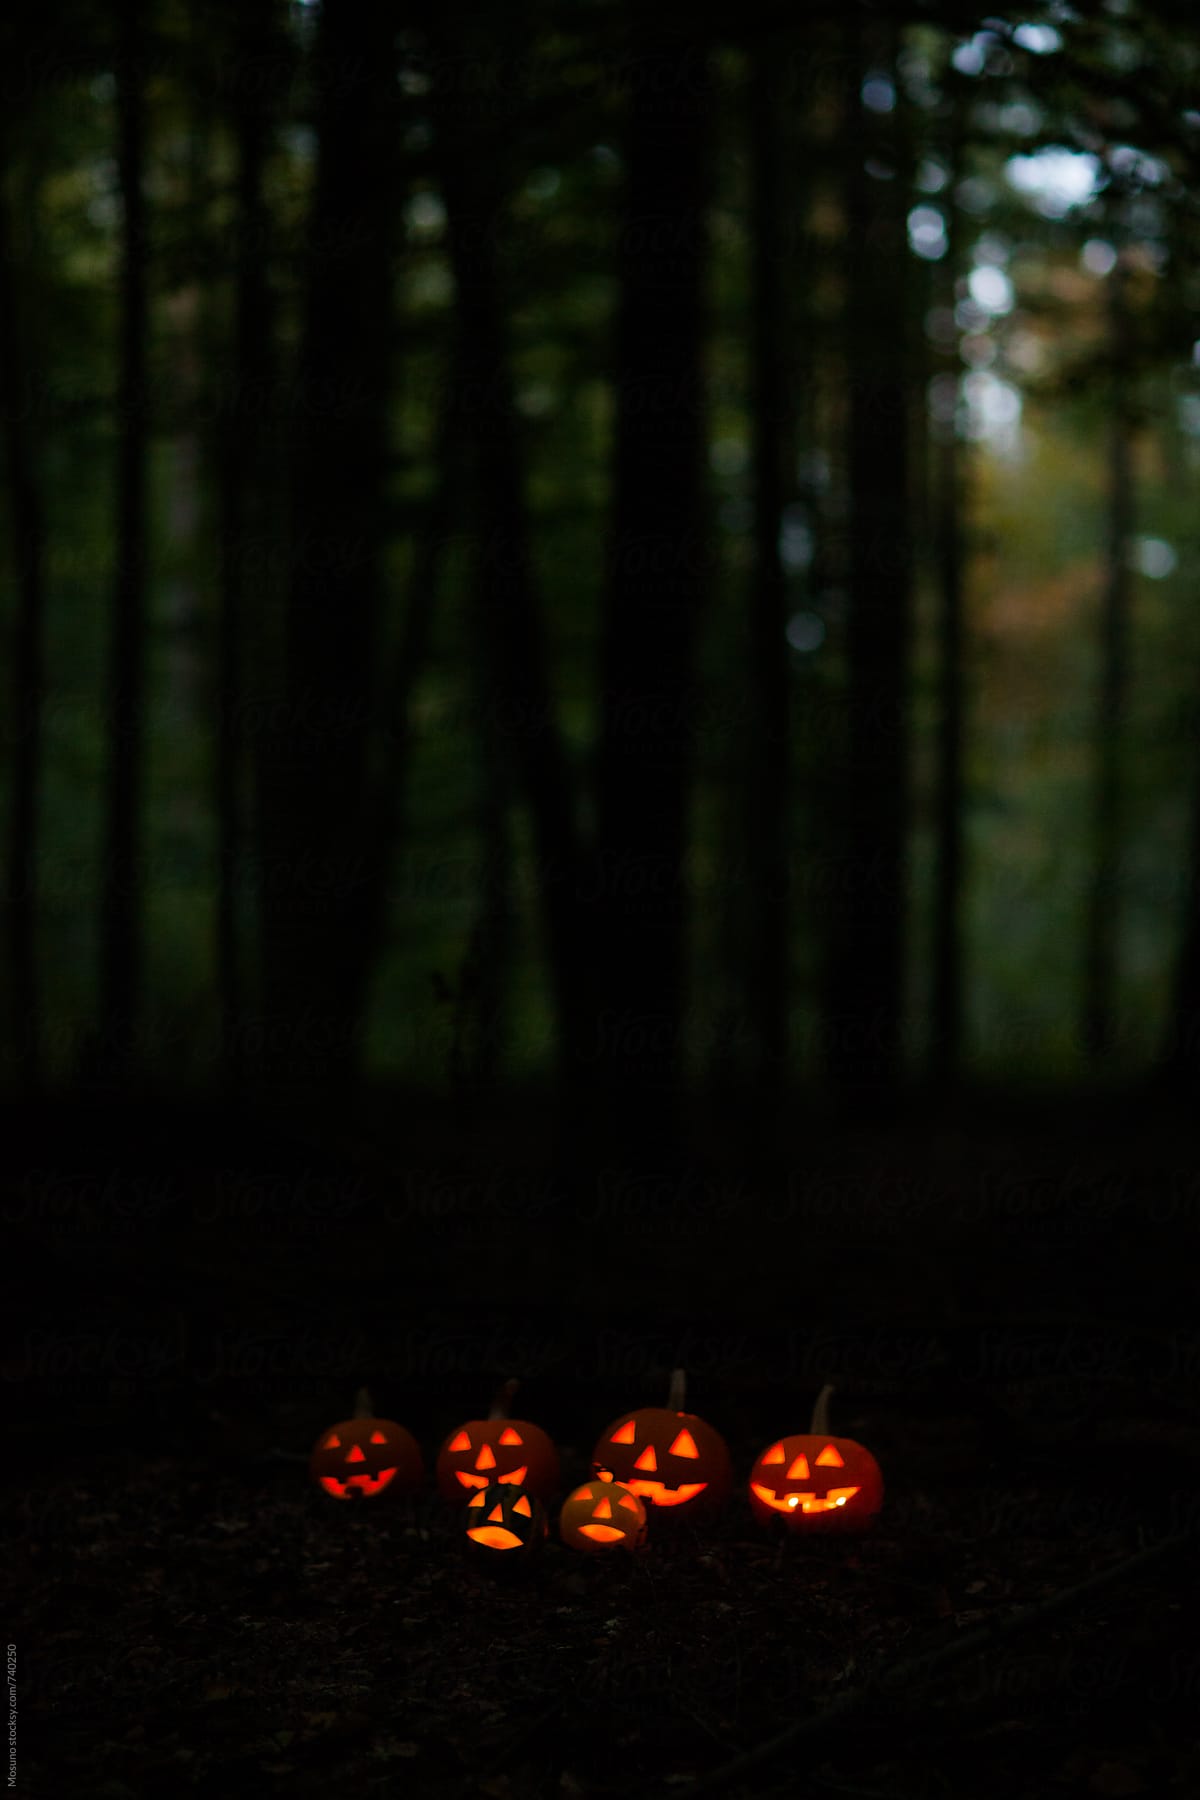 Scary Halloween Pumpkins in the Forest at Dusk